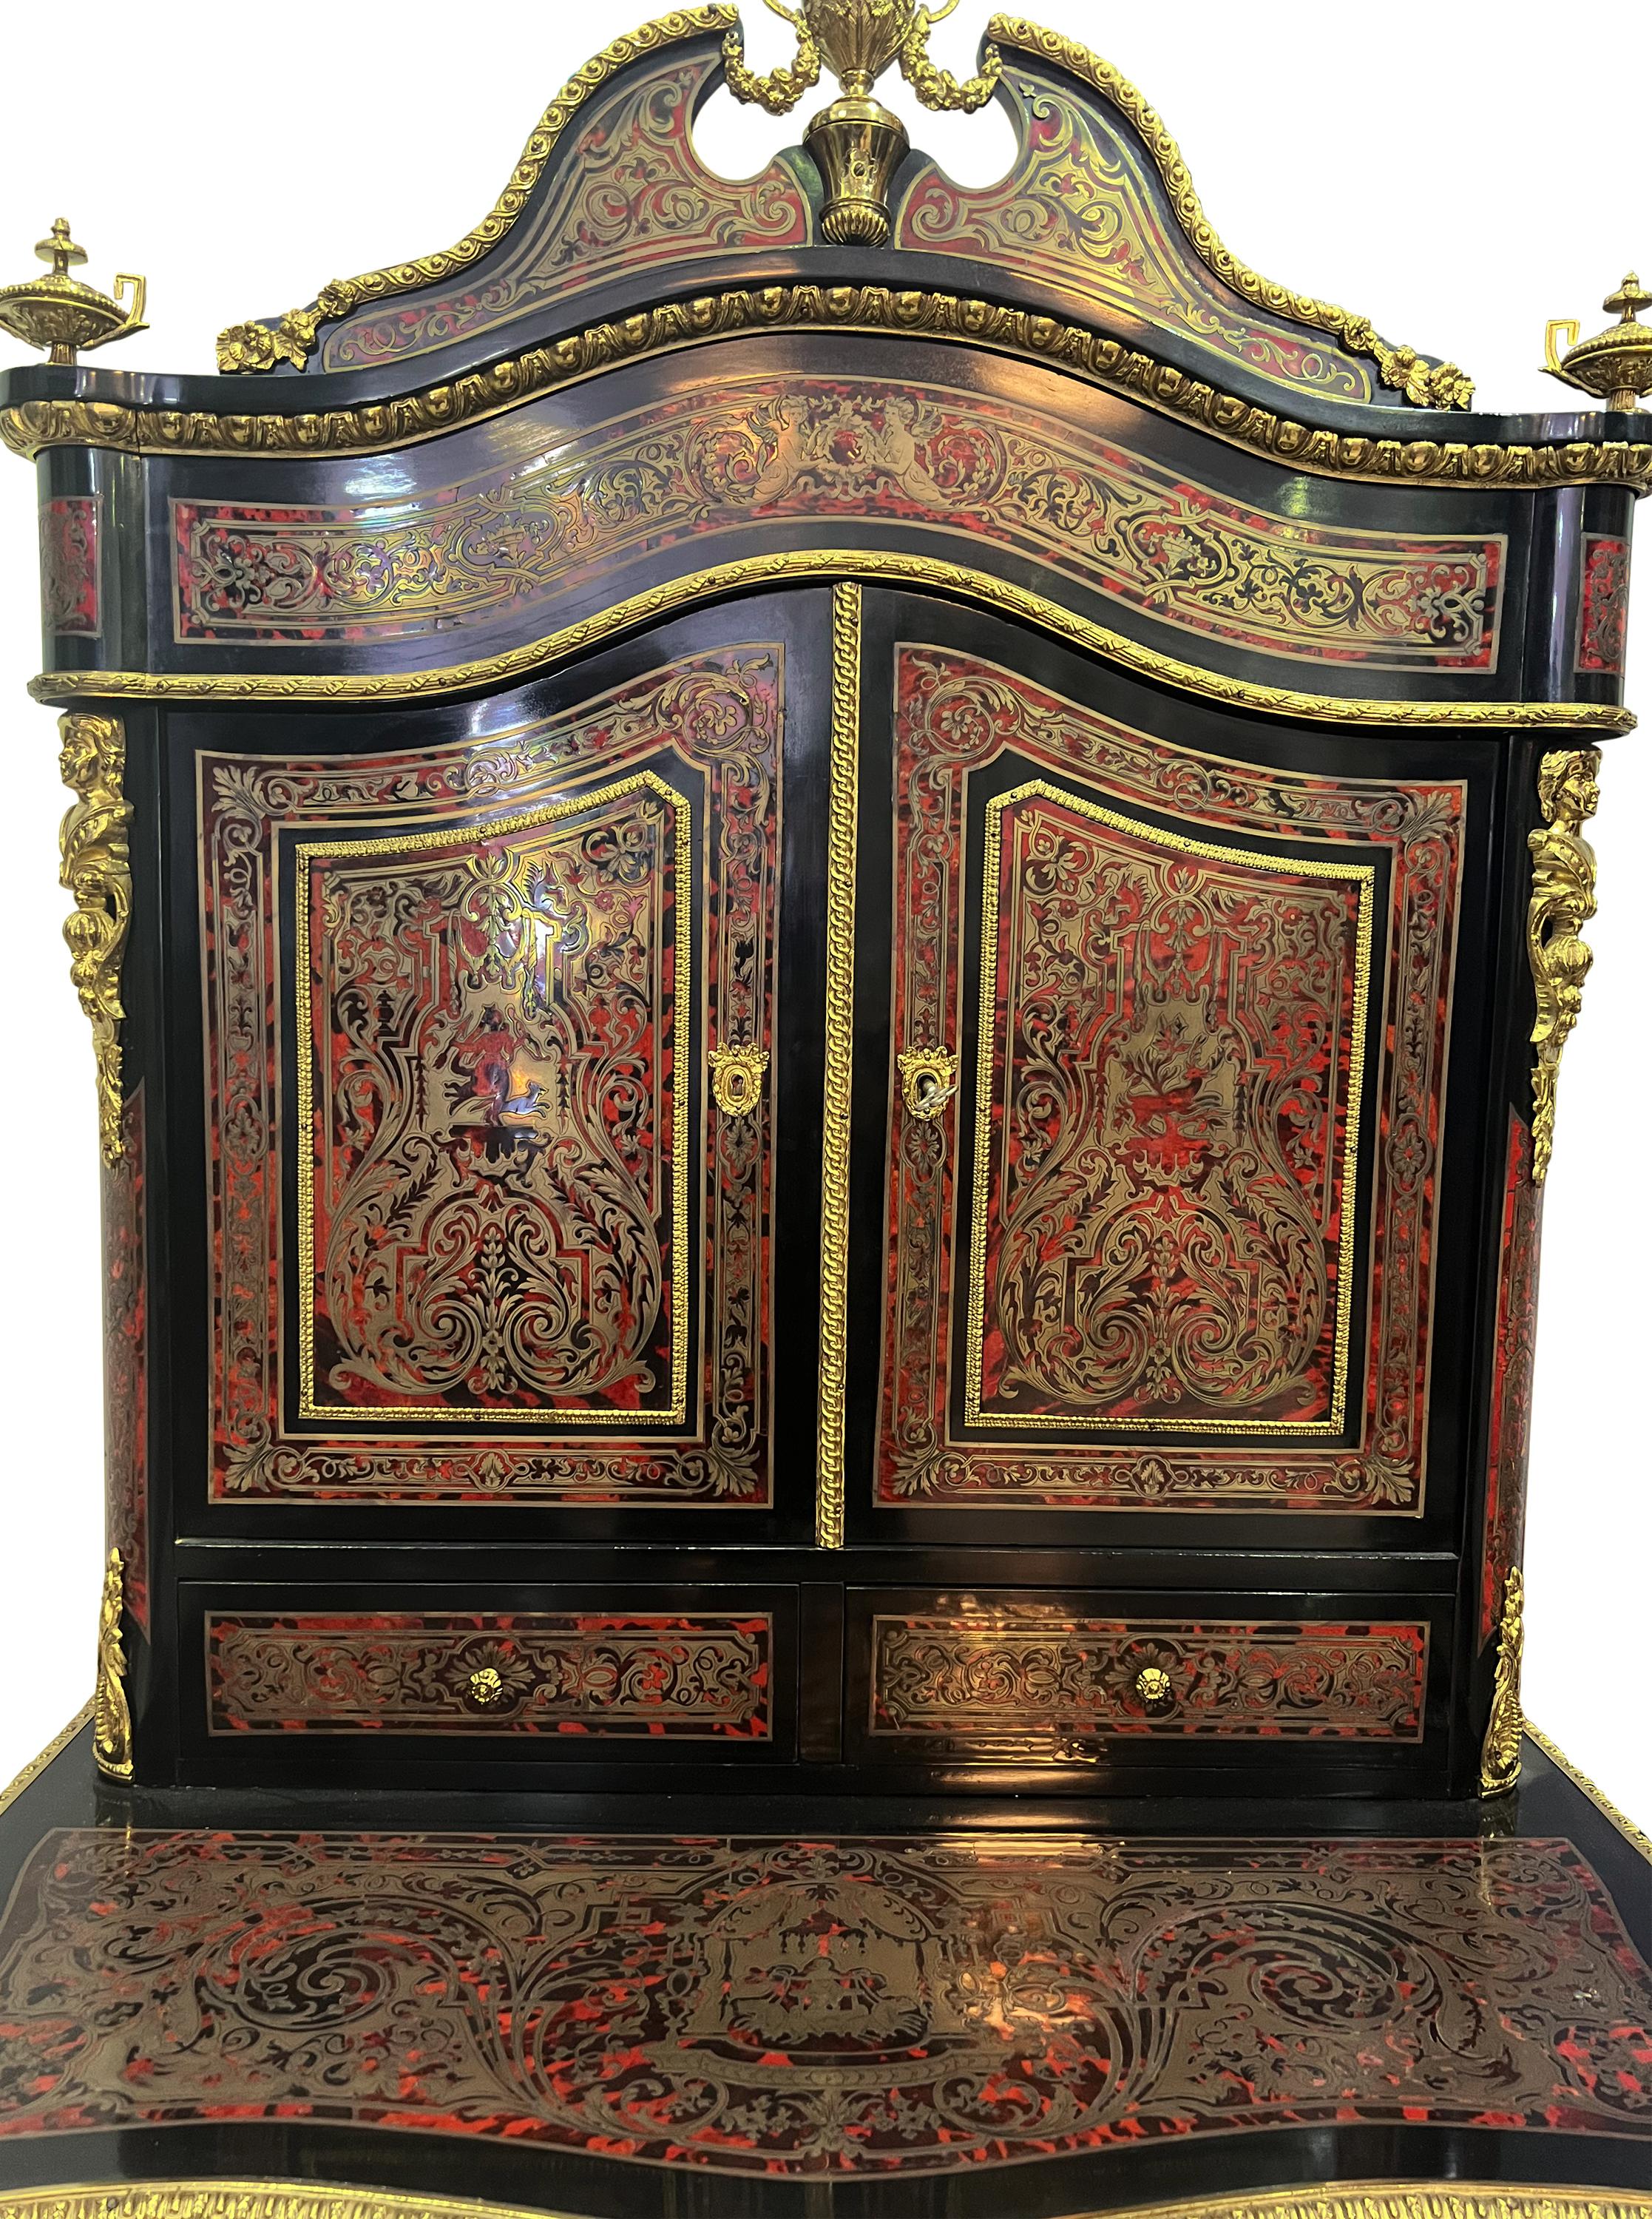 19th Century French Louis XV Style Ormolu Mounted Boulle Secretary Desk
Having a writing section along with a two door commode for mail secretary needs.
Mounted with ormolu bronze mounts and heavily decorated with inlaid brass wire throughout. The